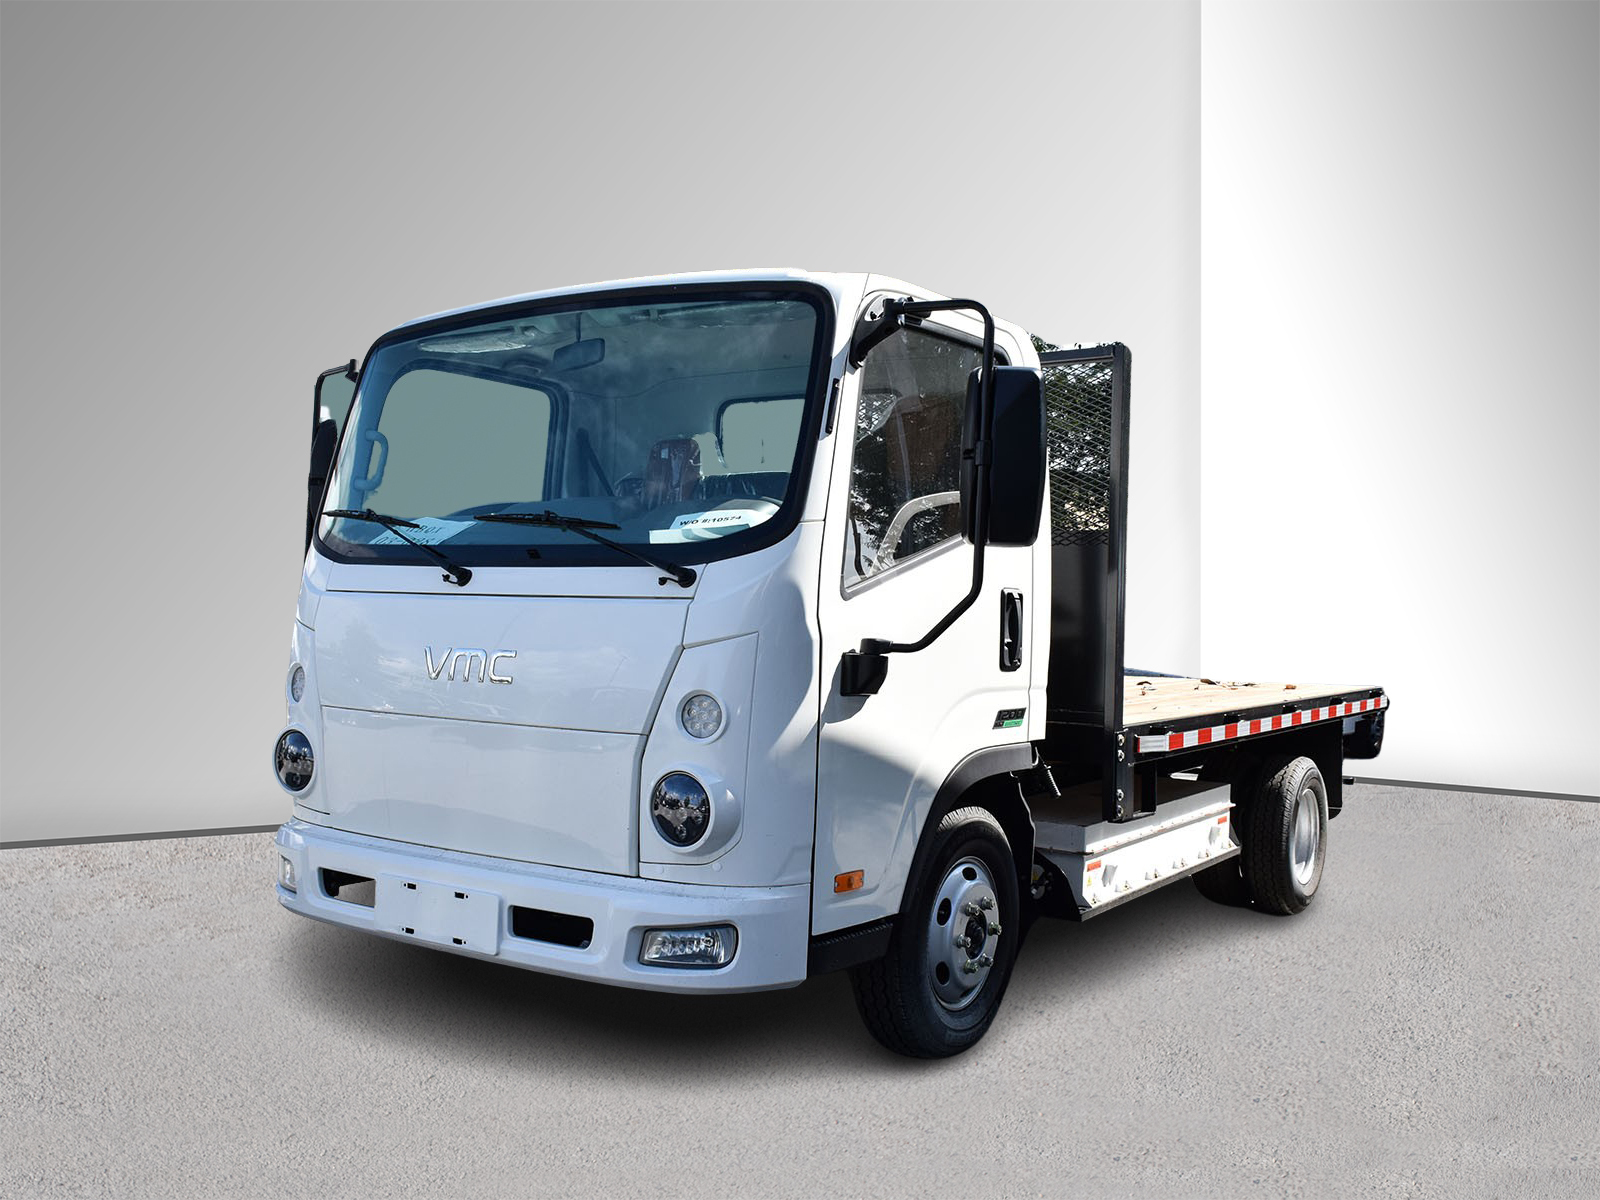 2023 VMC 1200 - Fully Electric Commercial Truck!